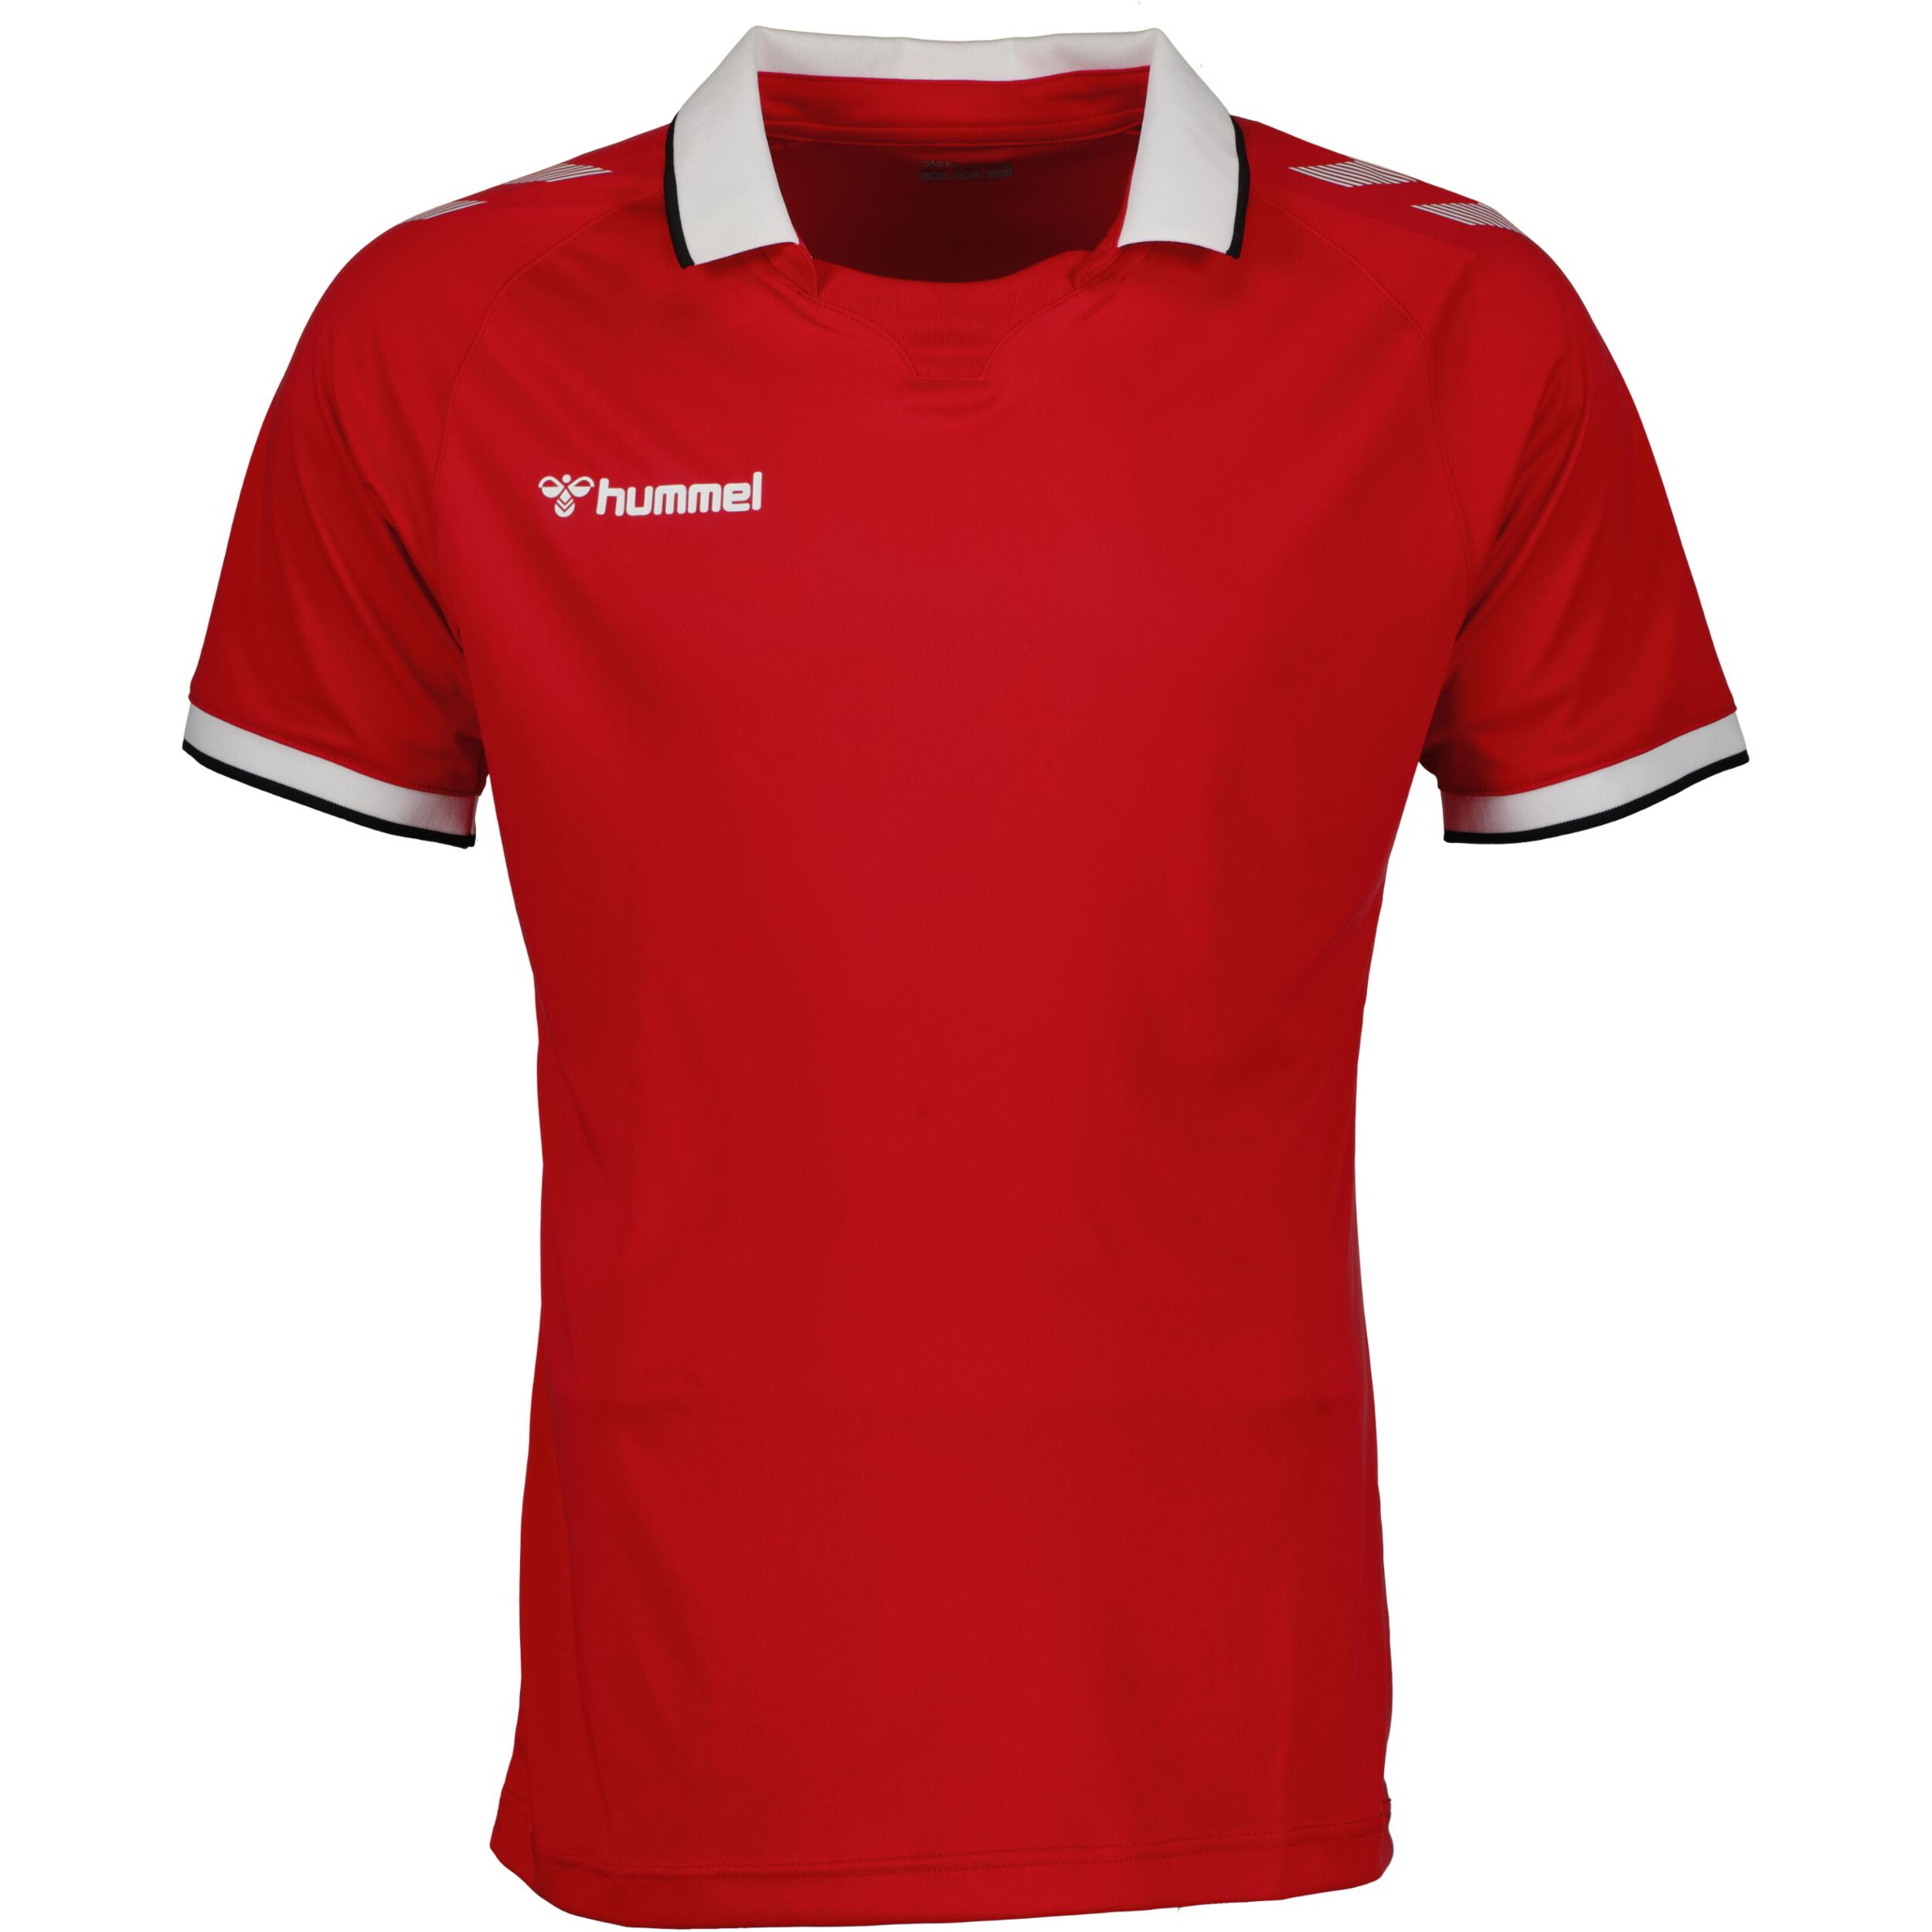 Impact jersey for men, great for football, in true red/white 1/3